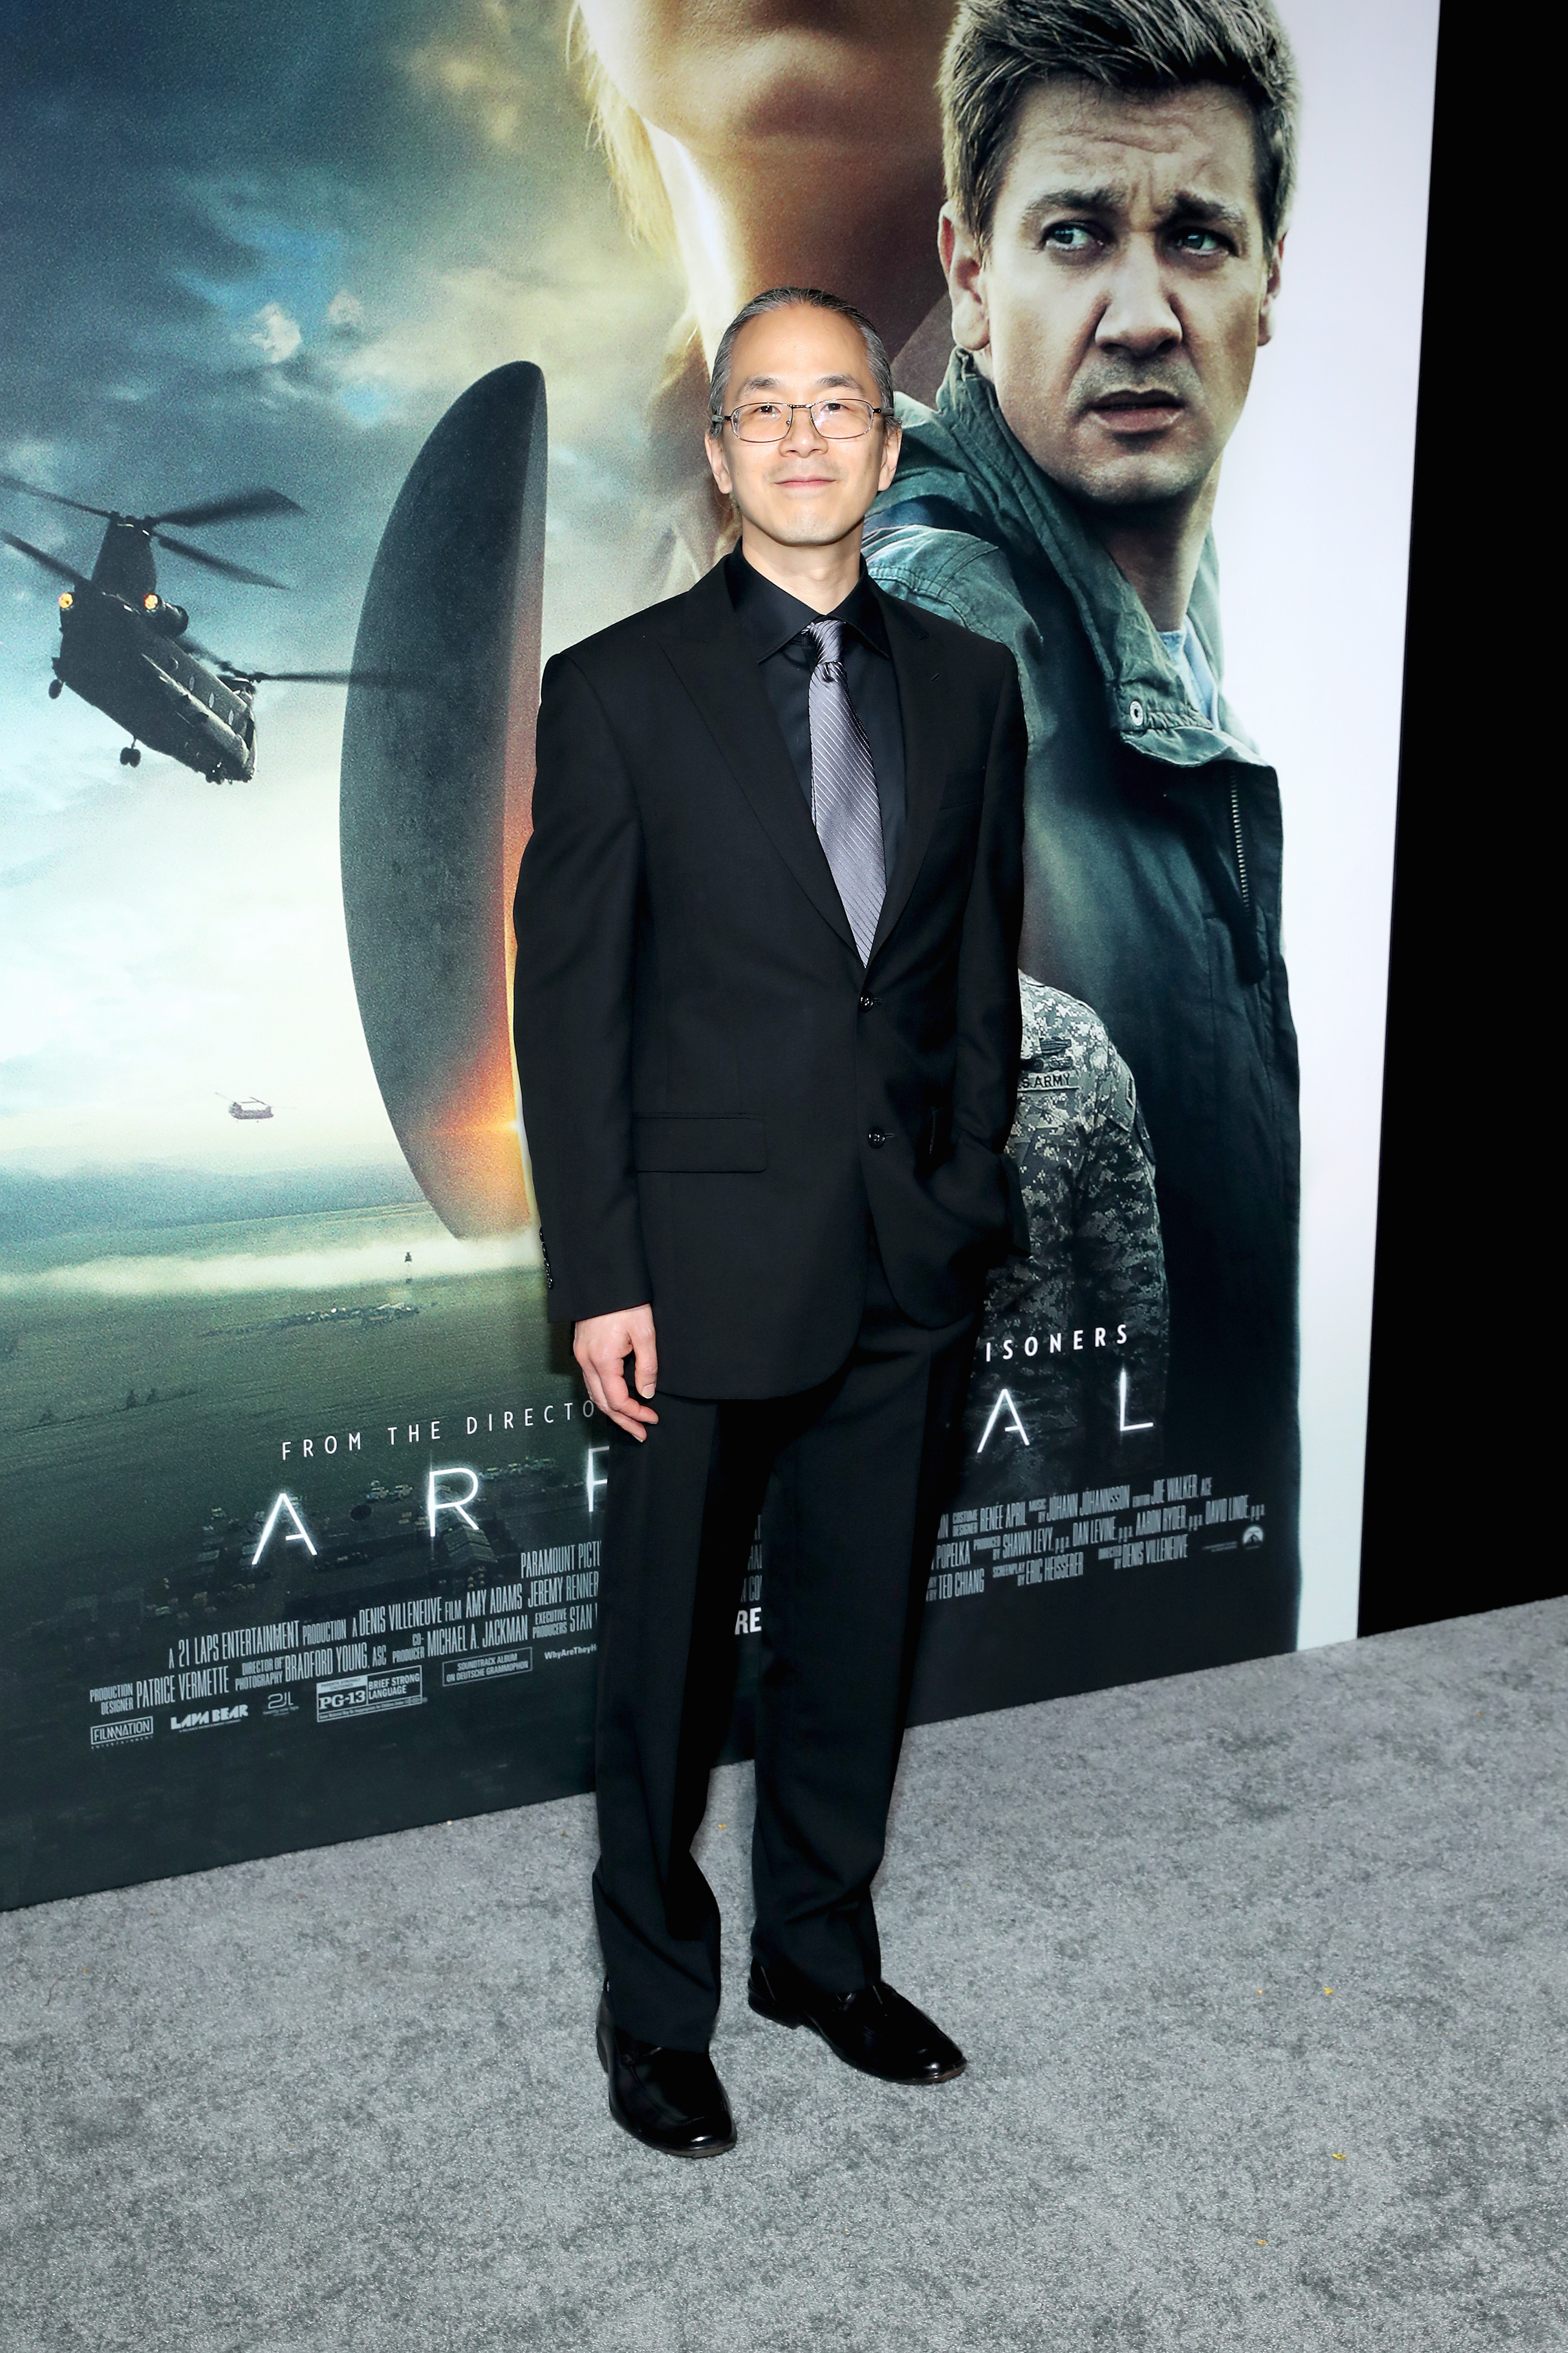 ted chiang movie